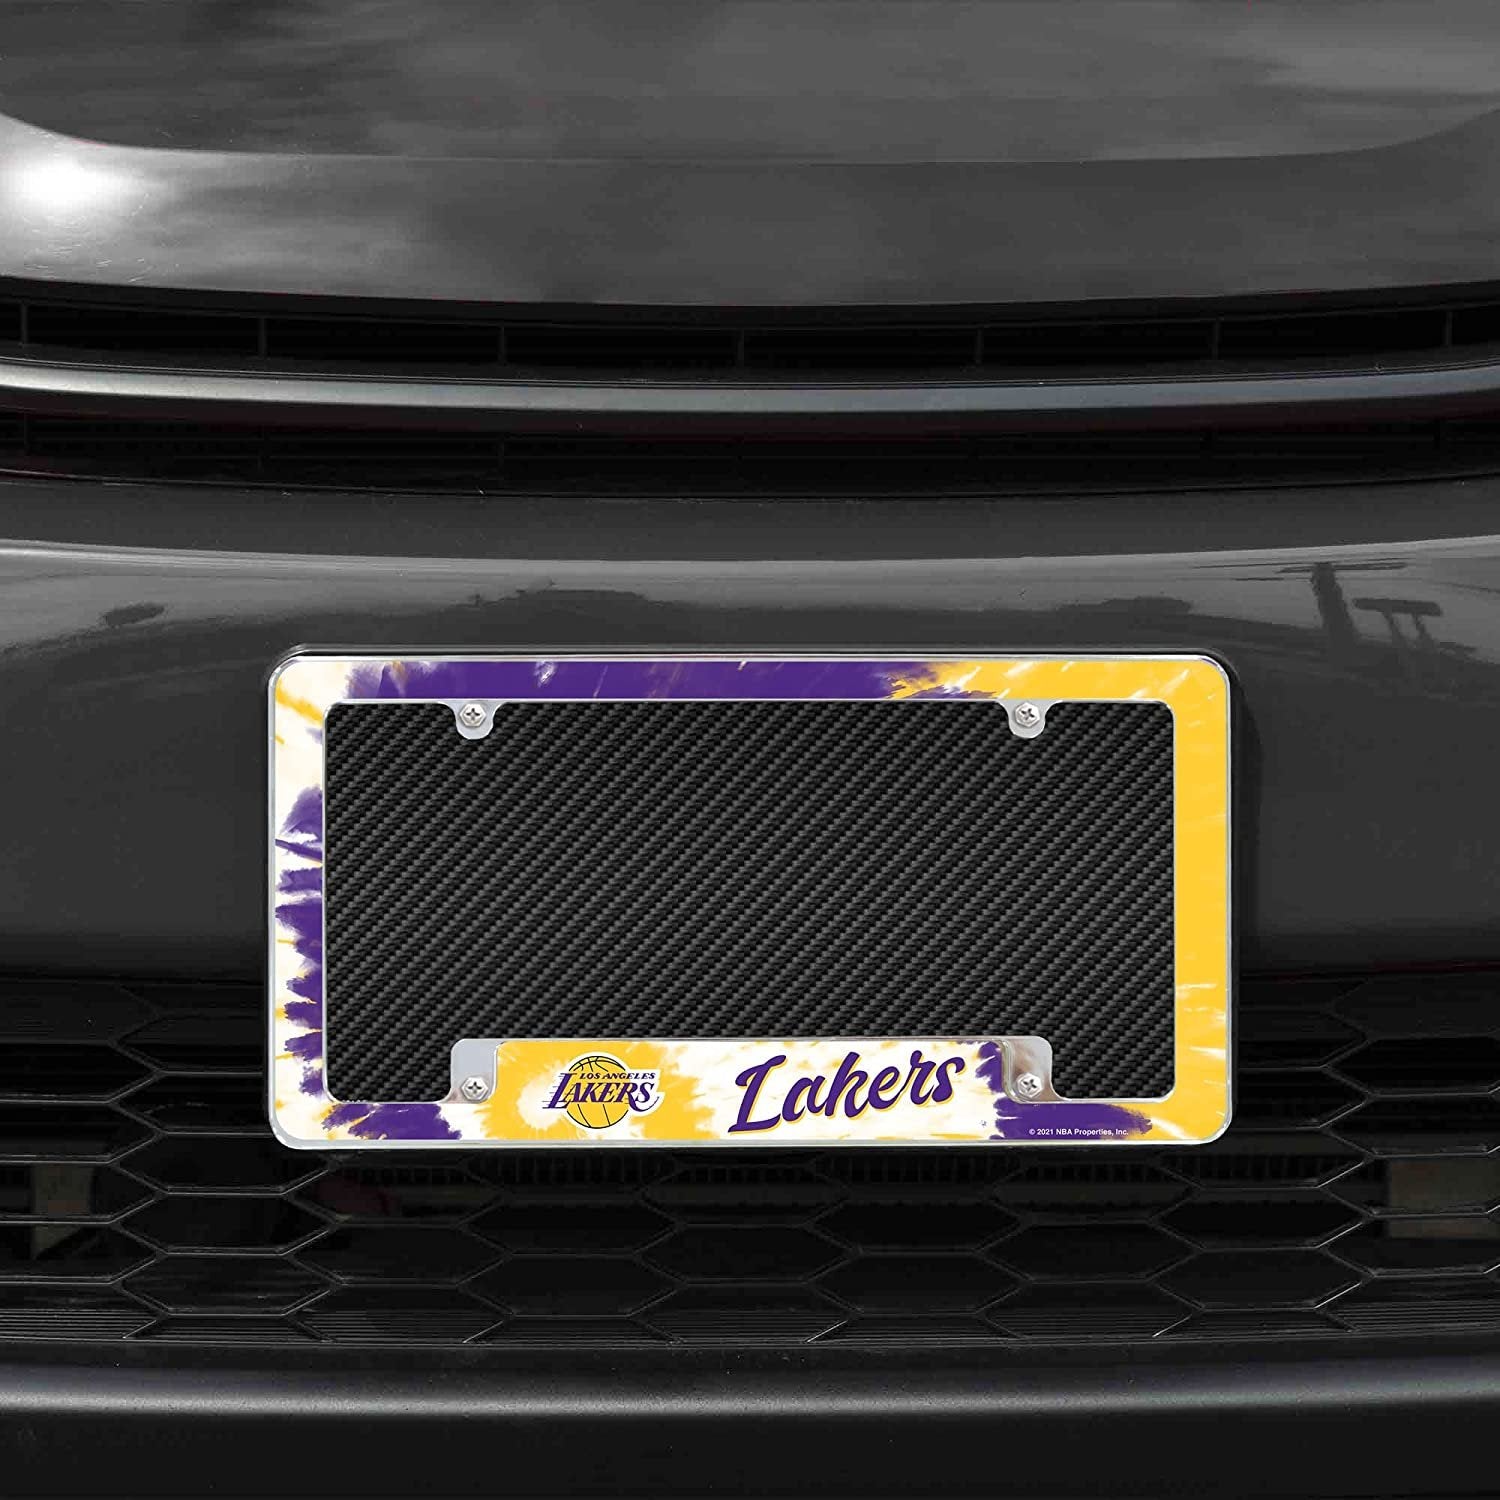 Los Angeles Lakers Metal License Plate Frame Chrome Tag Cover Tie Dye Design 6x12 Inch